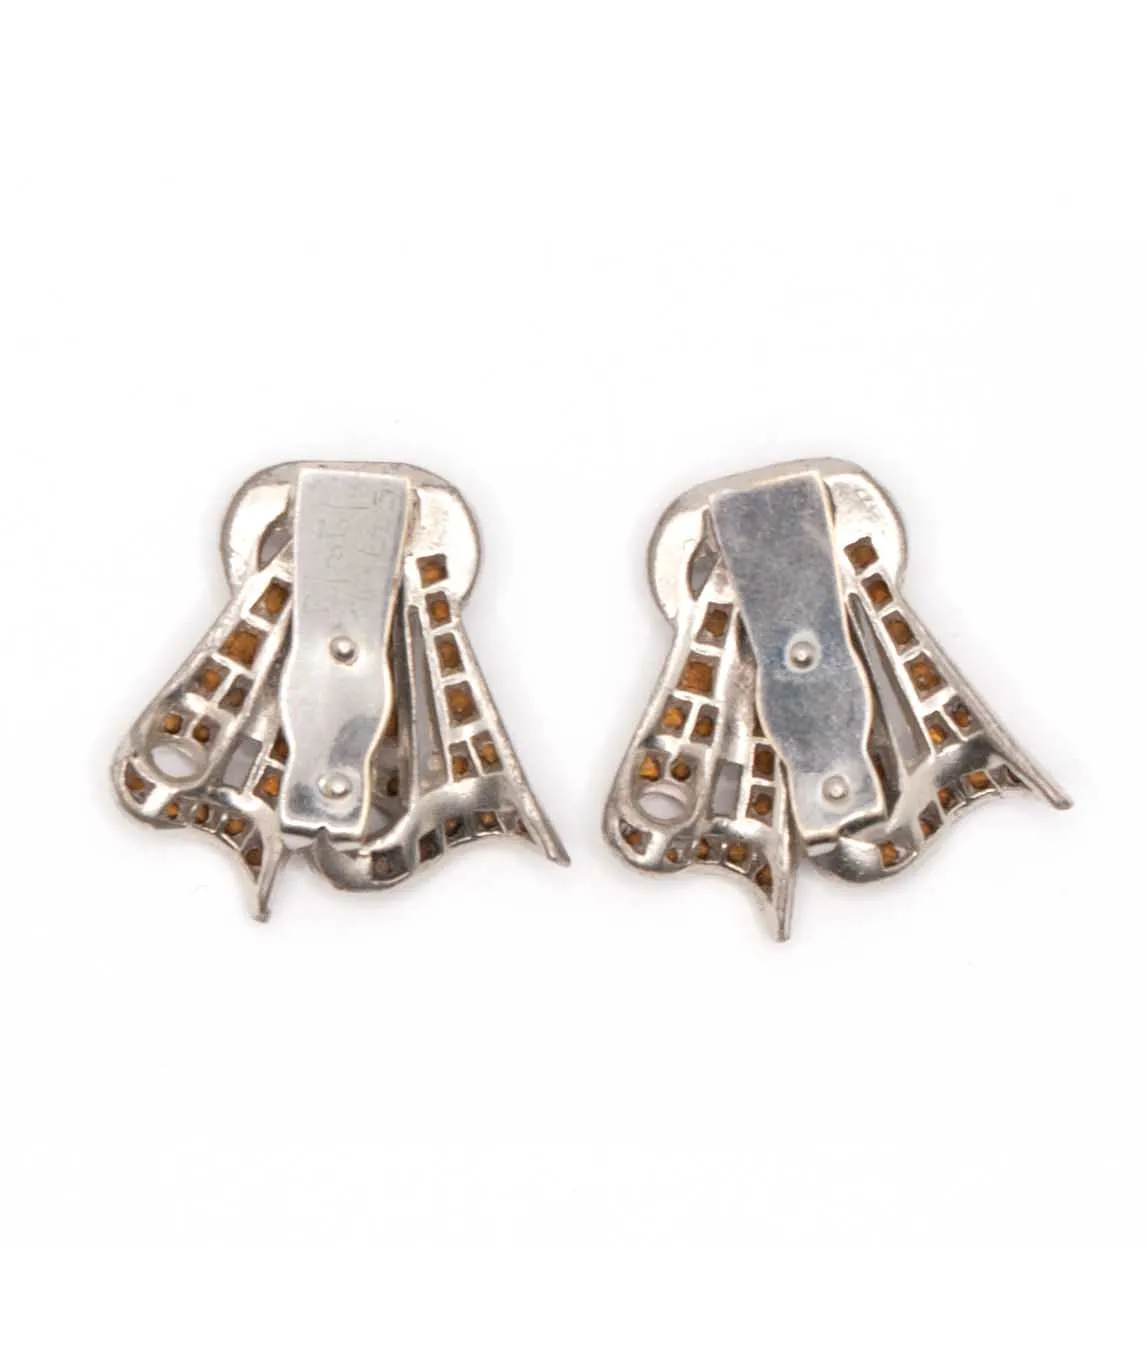 French Art Deco Dress Clips